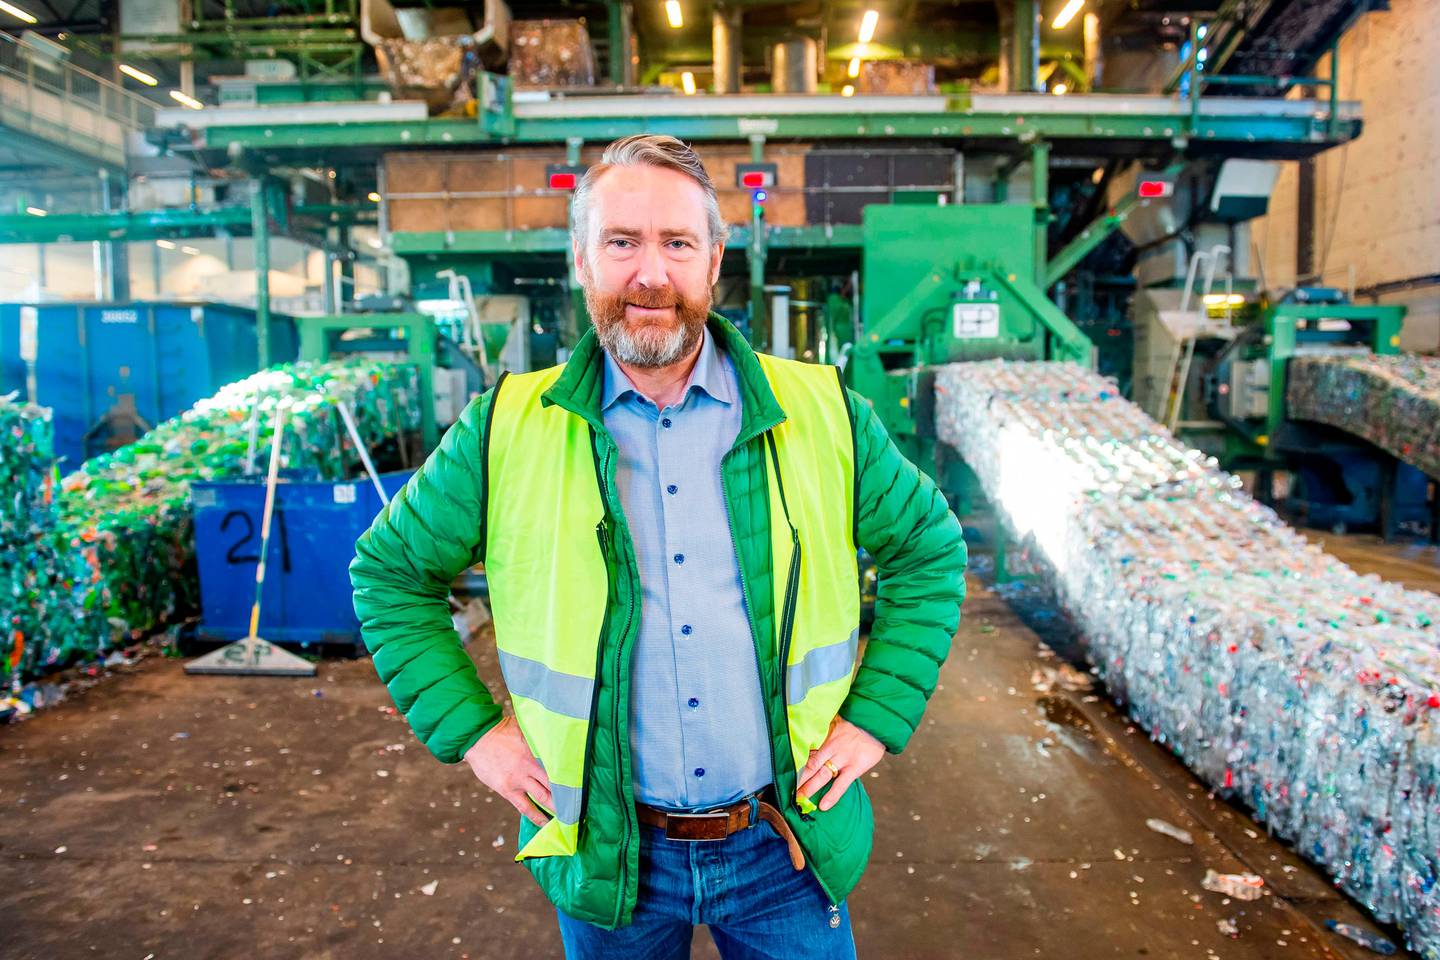 Kjell Olav Maldum, Managing director at the company Infinitum poses for a photo at the plant in Fetsund, southeastern Norway, on January 21, 2020. - With its 97 percent recycling rate, Norway is 10 years ahead of the EU's 2029 target date, by when countries must recycle at least 90 percent of their plastic bottles. (Photo by Fredrik Varfjell / AFP)